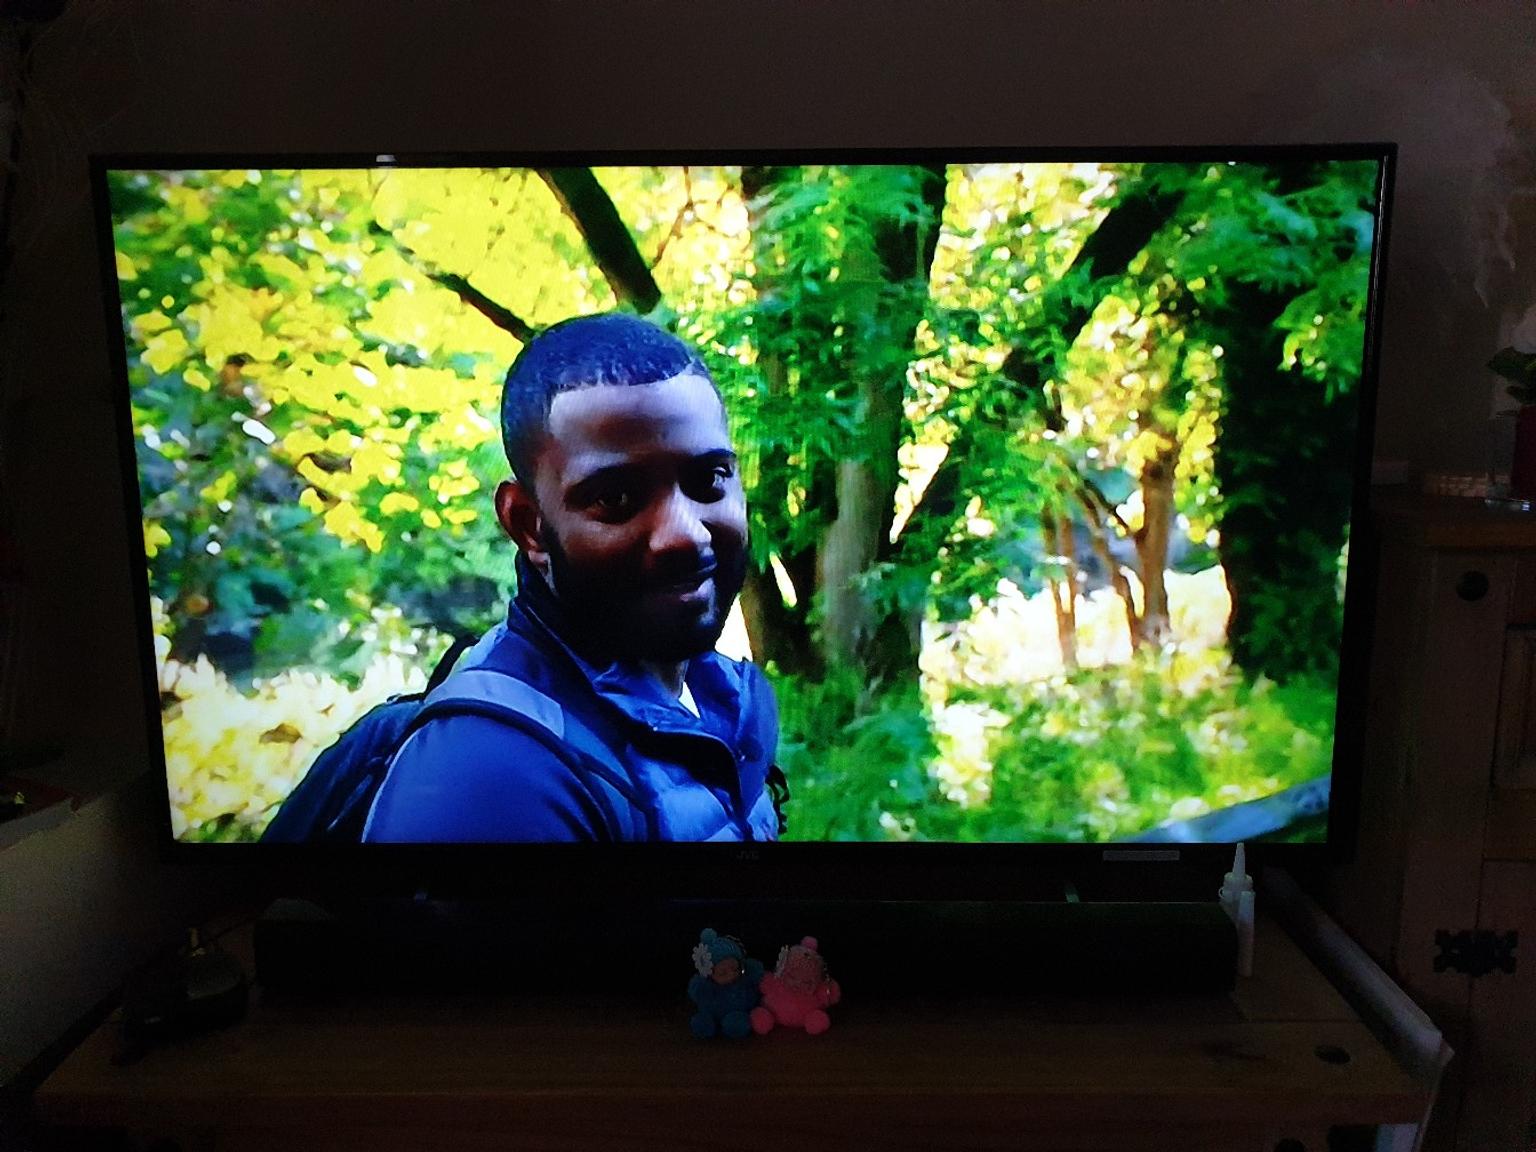 Jvc 50 Led Full Hd Tv In Pe26 Huntingdonshire For 210 00 For